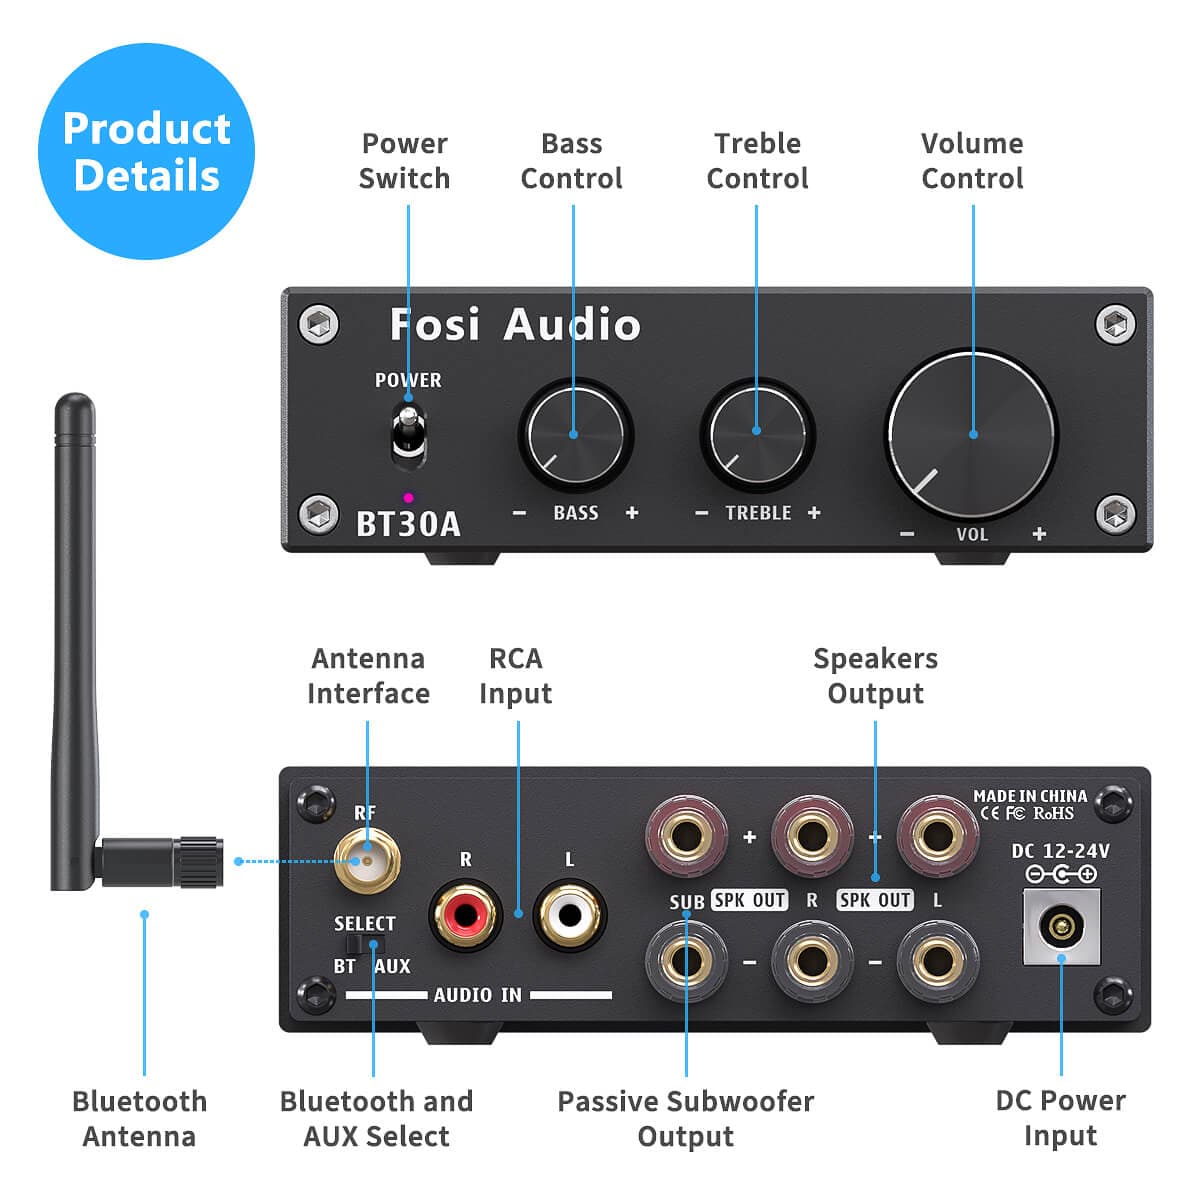 fosi audio BT30A product details